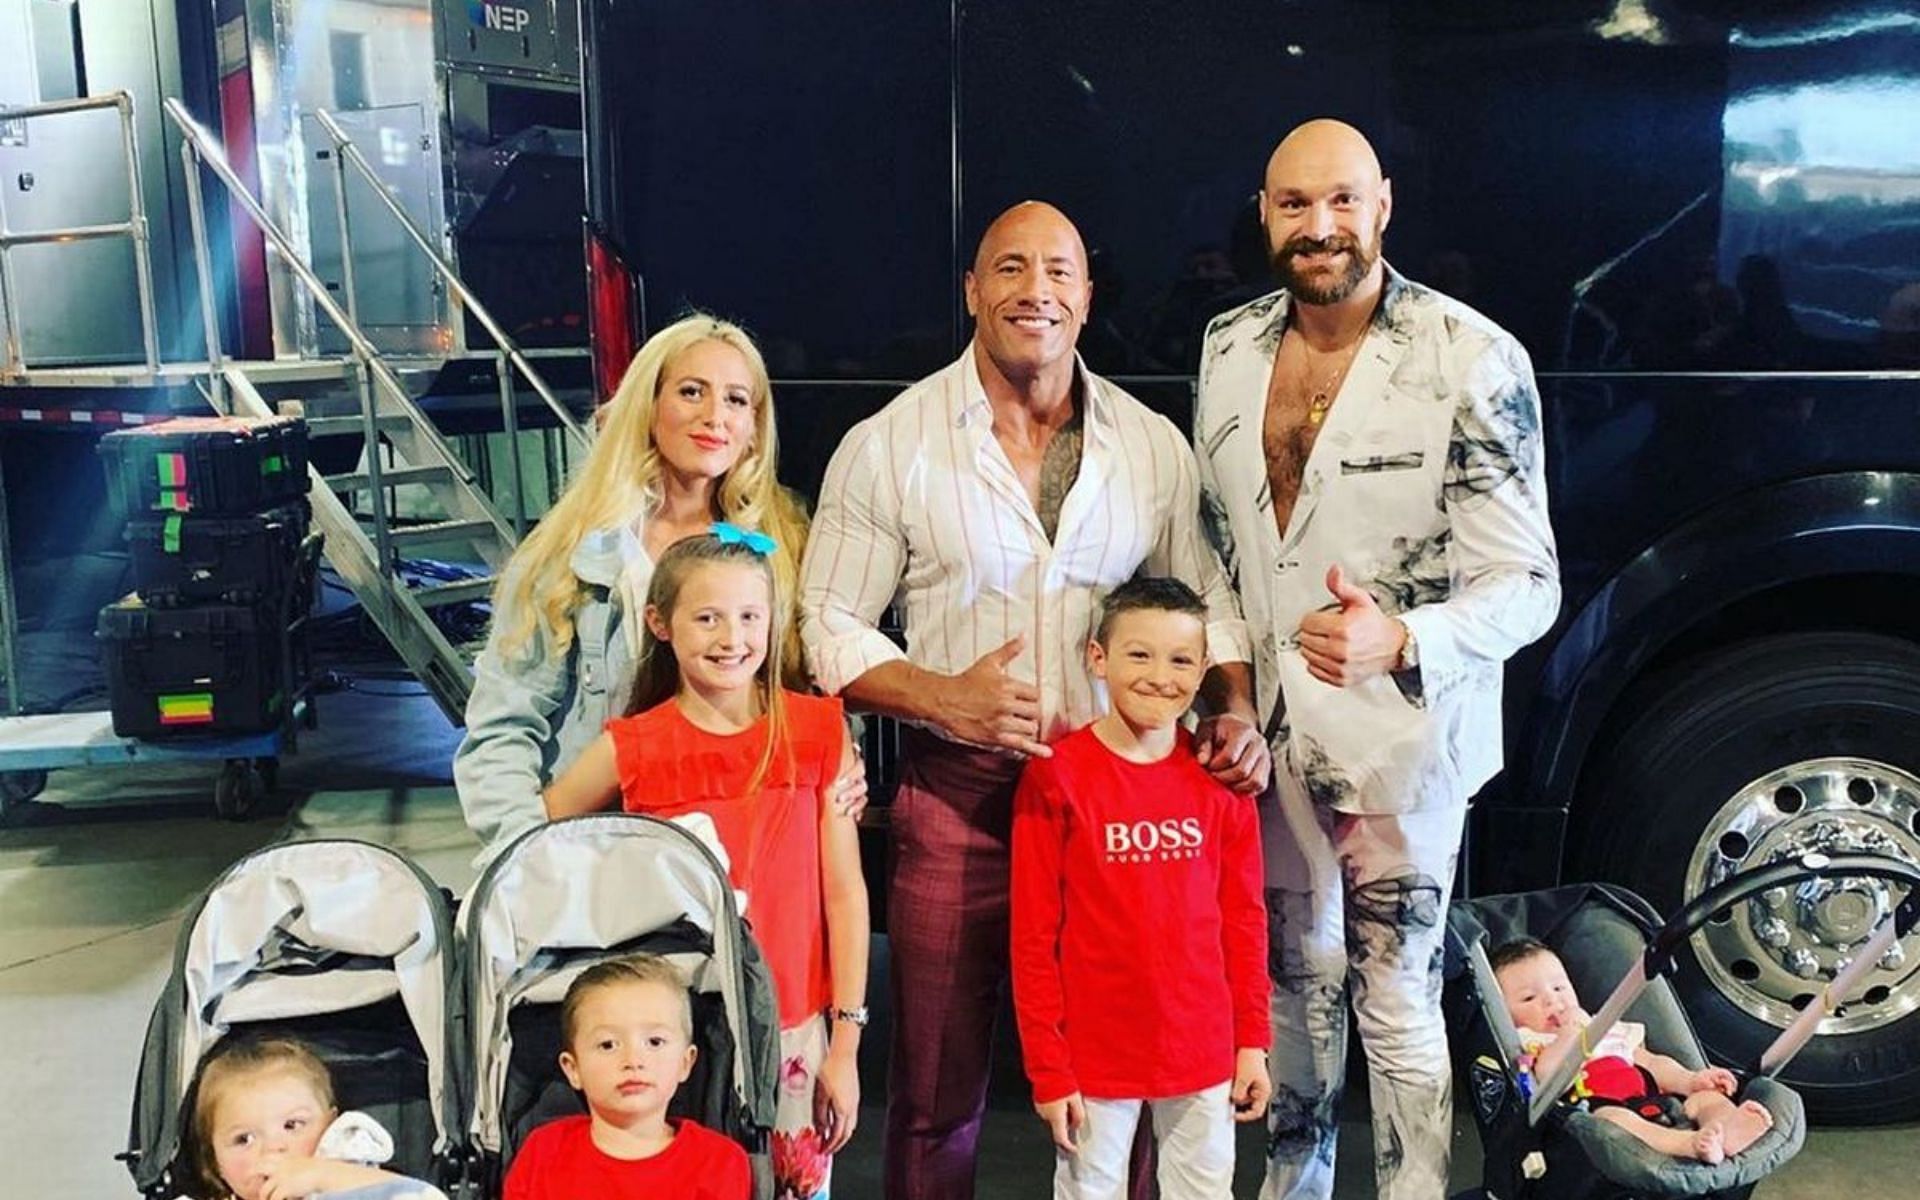 Tyson Fury and his family pose for a picture with The Rock